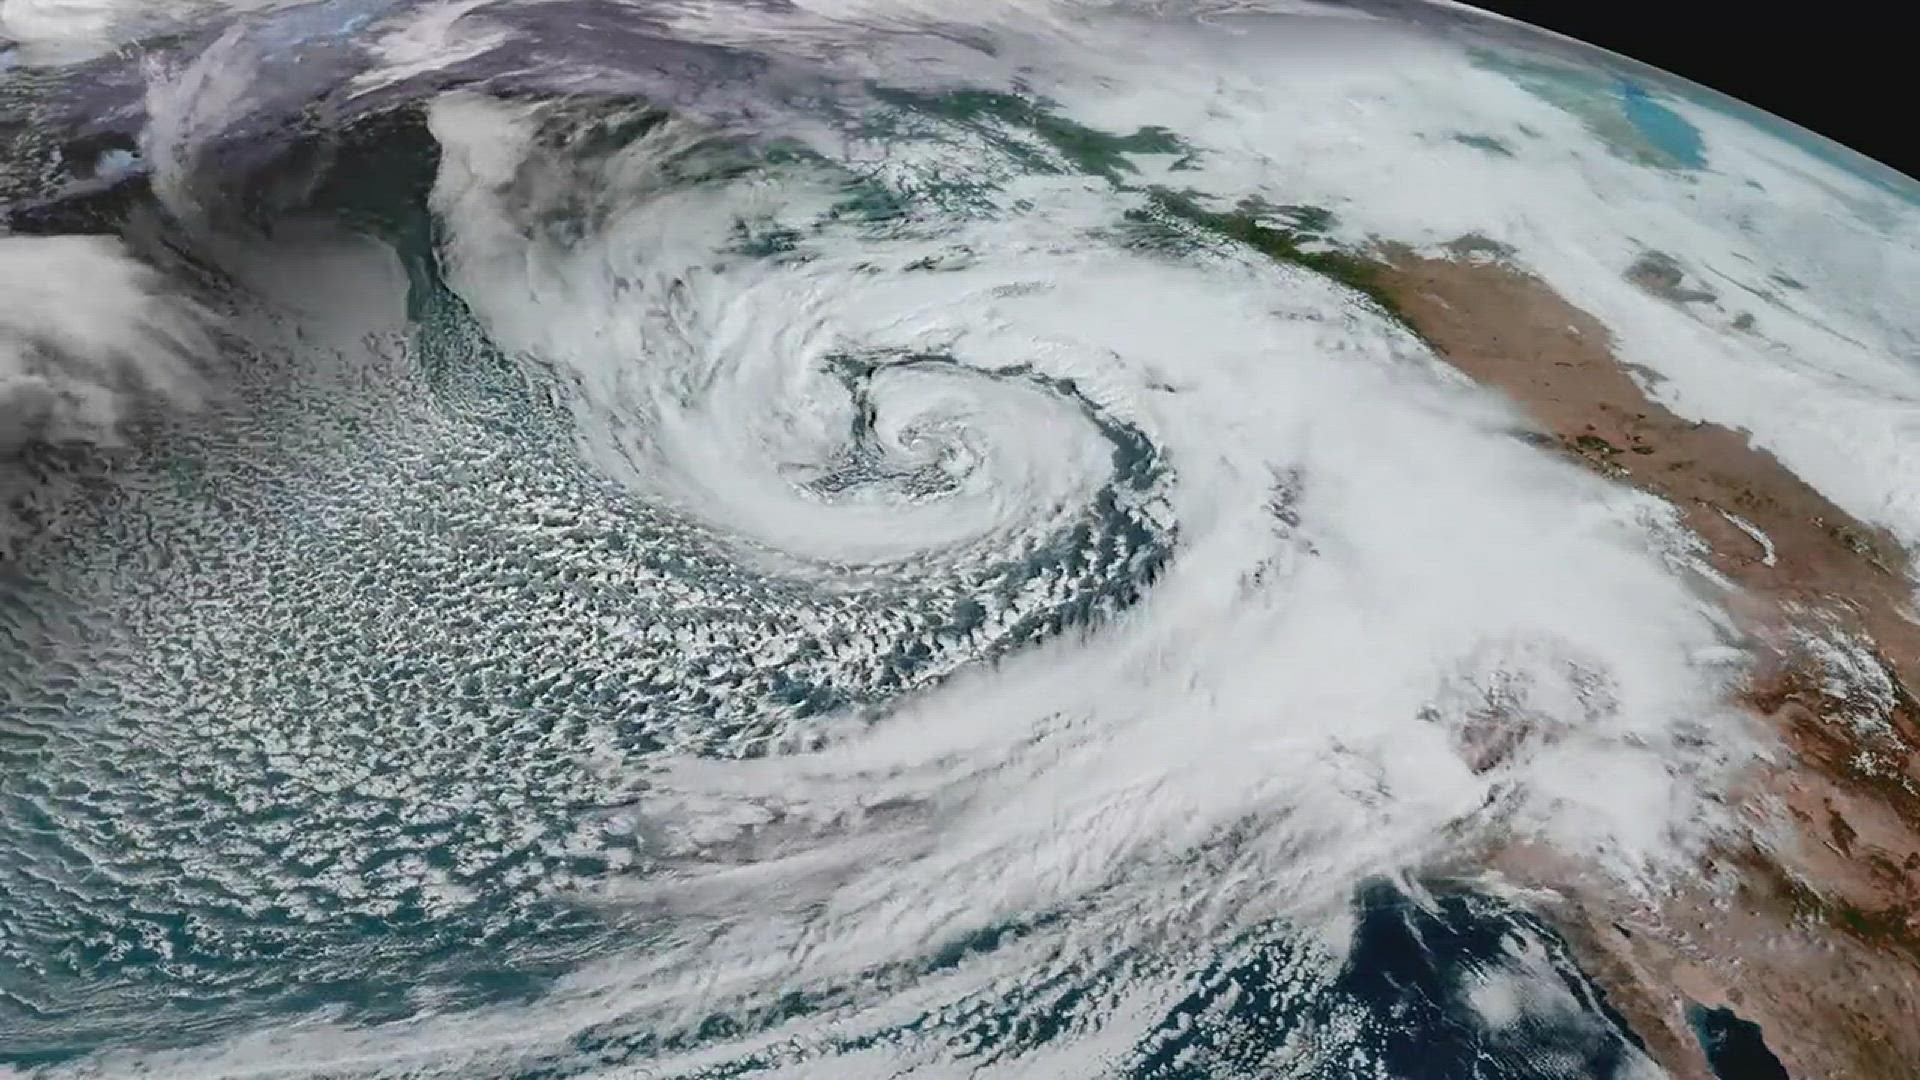 Satellite images of severe storms on the West Coast show a bomb cyclone.